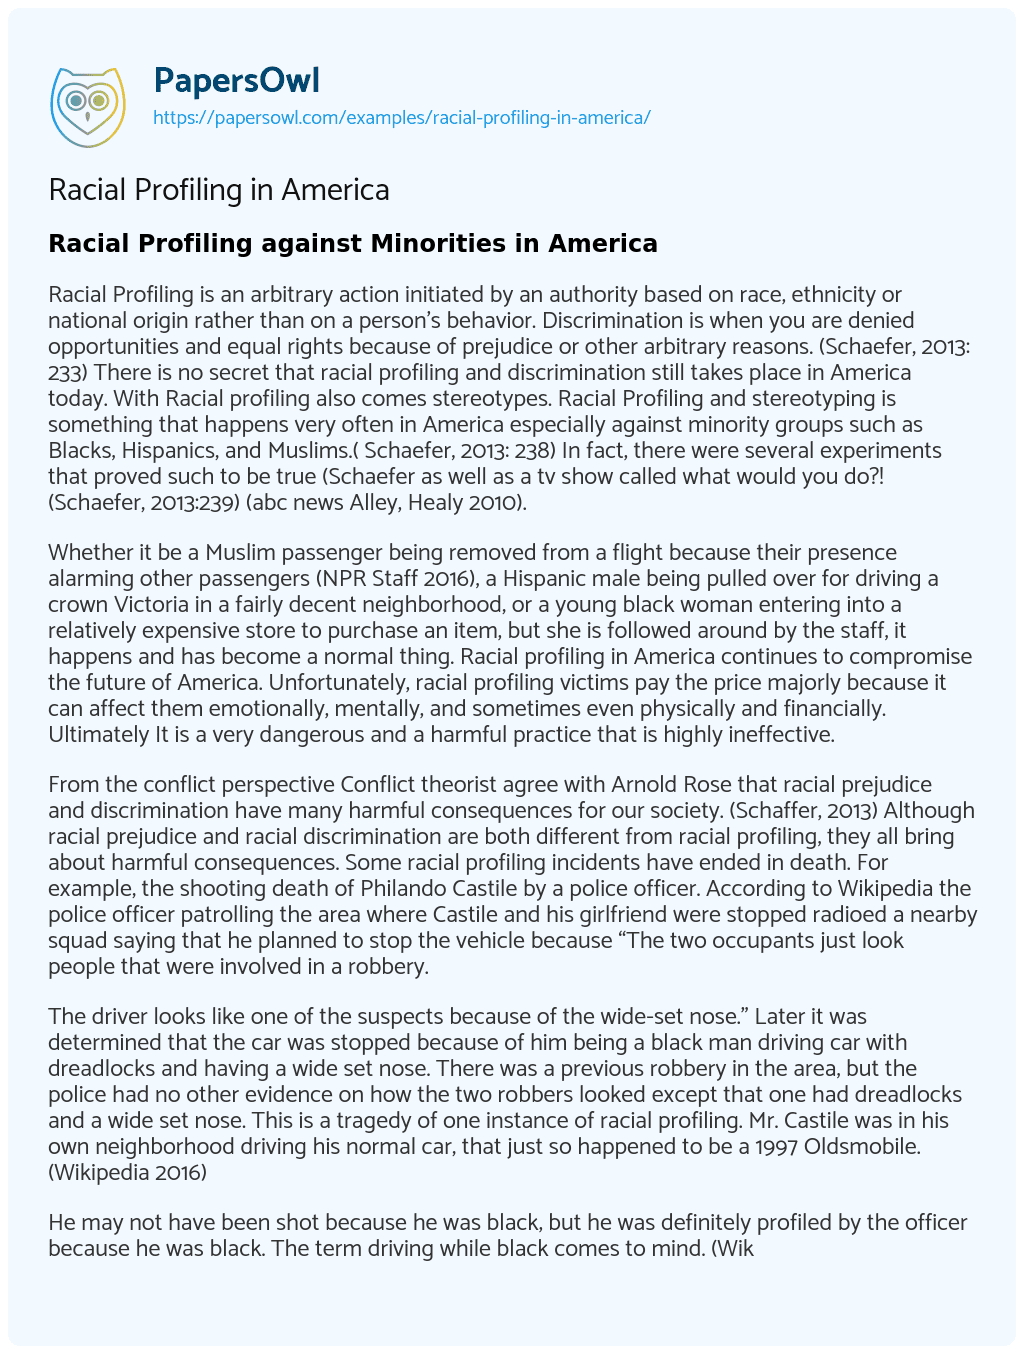 Essay on Racial Profiling in America